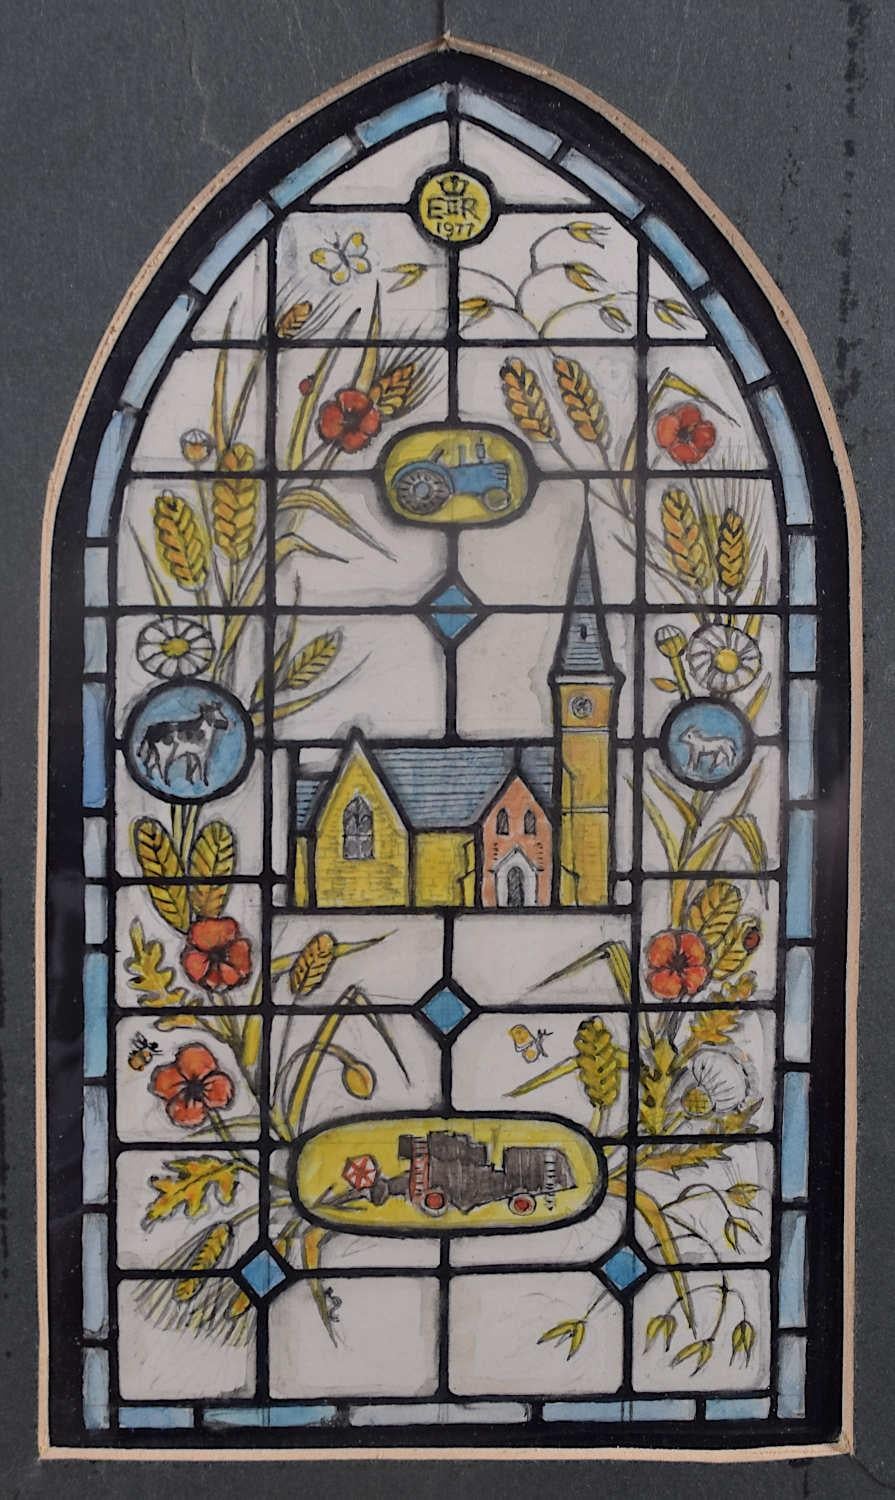 We acquired a series of watercolour stained glass designs from Jane Gray's studio. To find more scroll down to "More from this Seller" and below it click on "See all from this seller." 

Jane Gray (b.1931)
Stained Glass Design
Watercolour
15.5 x 8.5